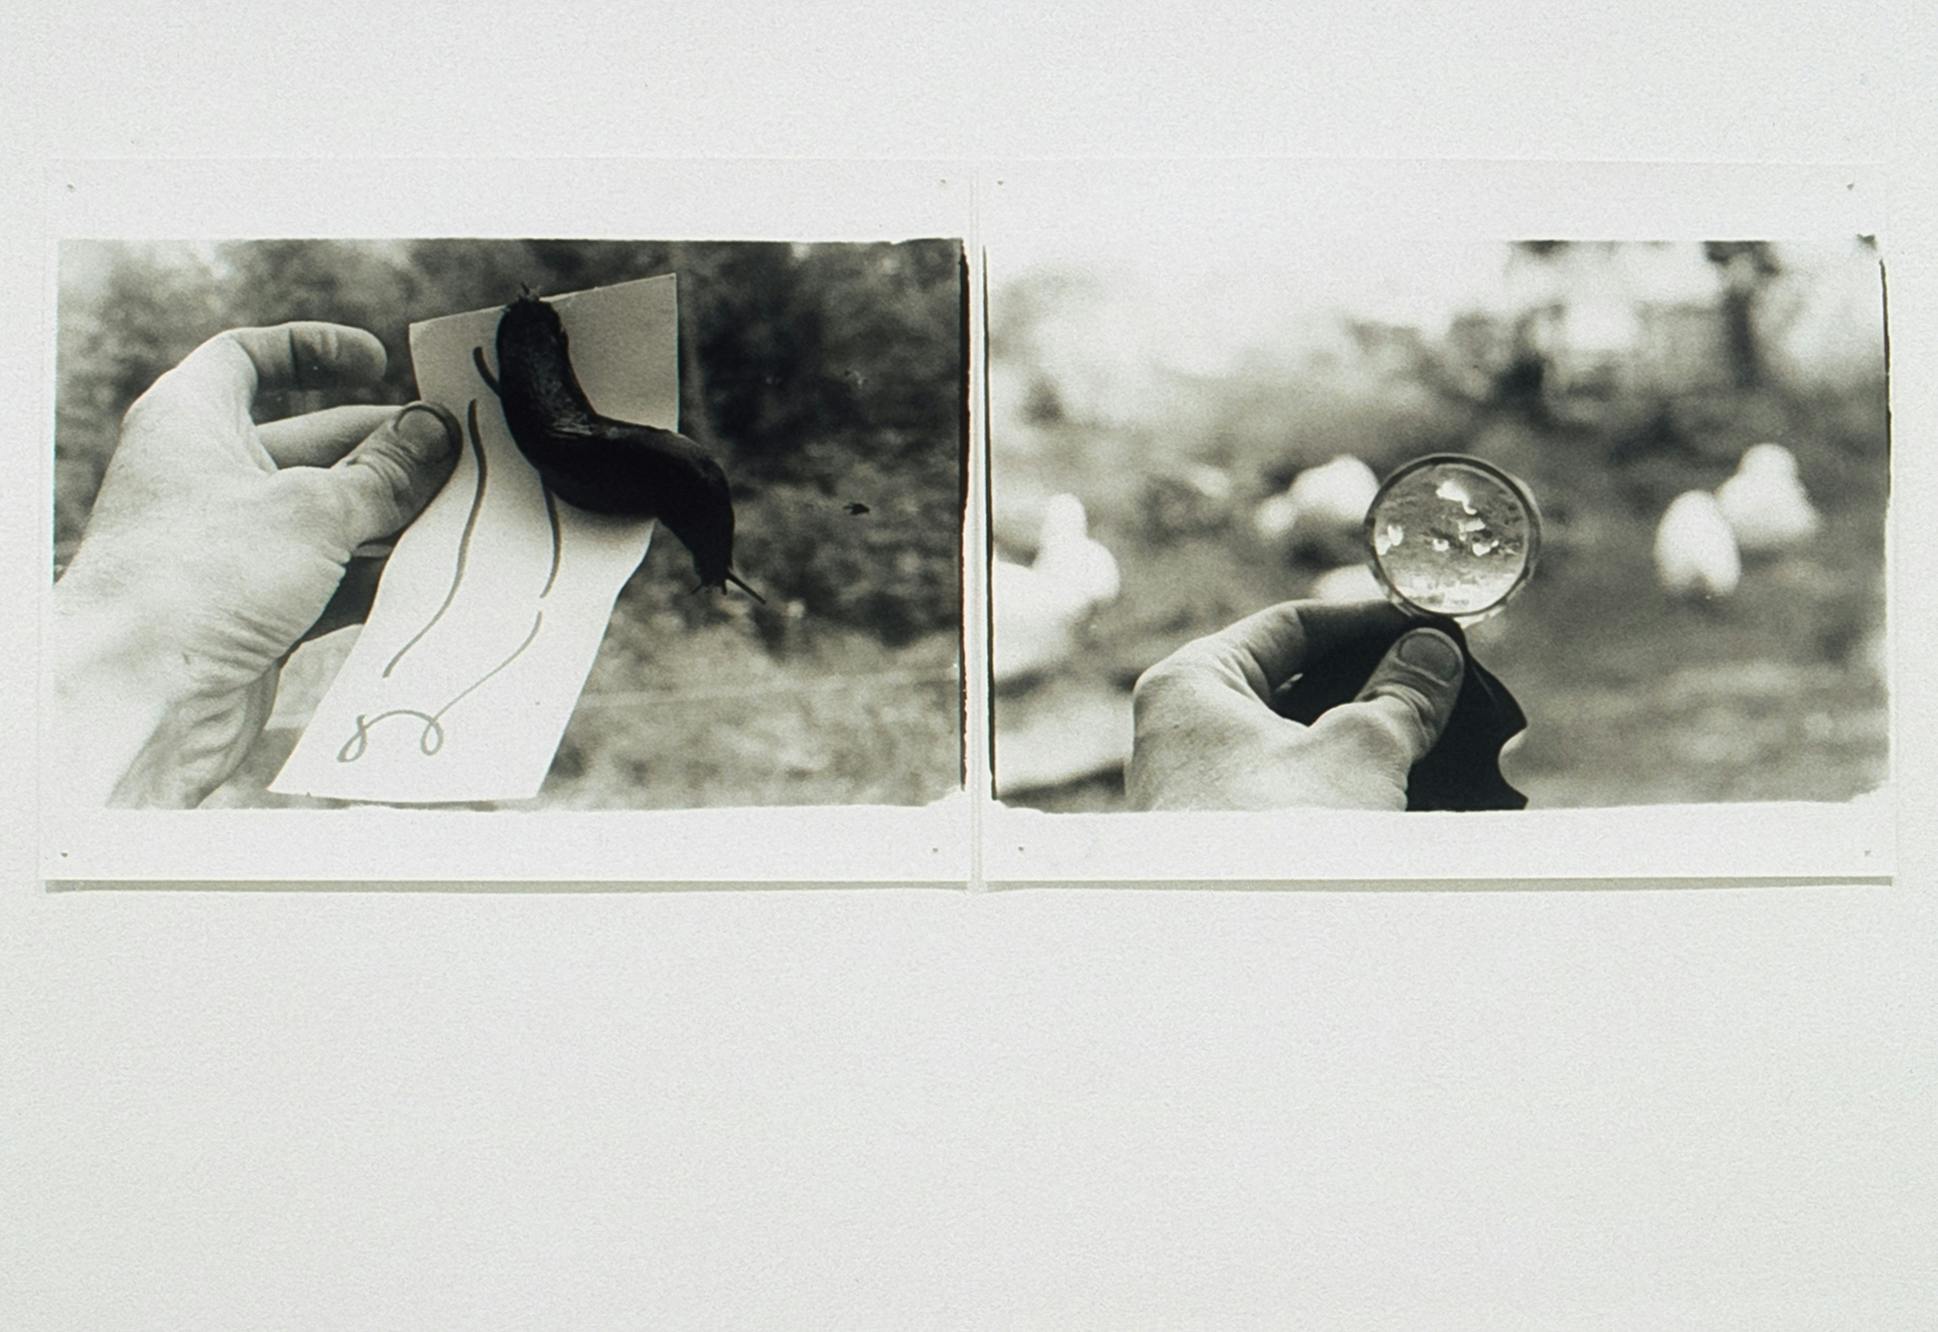 Two black & white photographs side by side. One depicts a hand holding a piece of paper on which a slug is perched and the other depicts a hand with a small magnifying glass over a blurry background. 